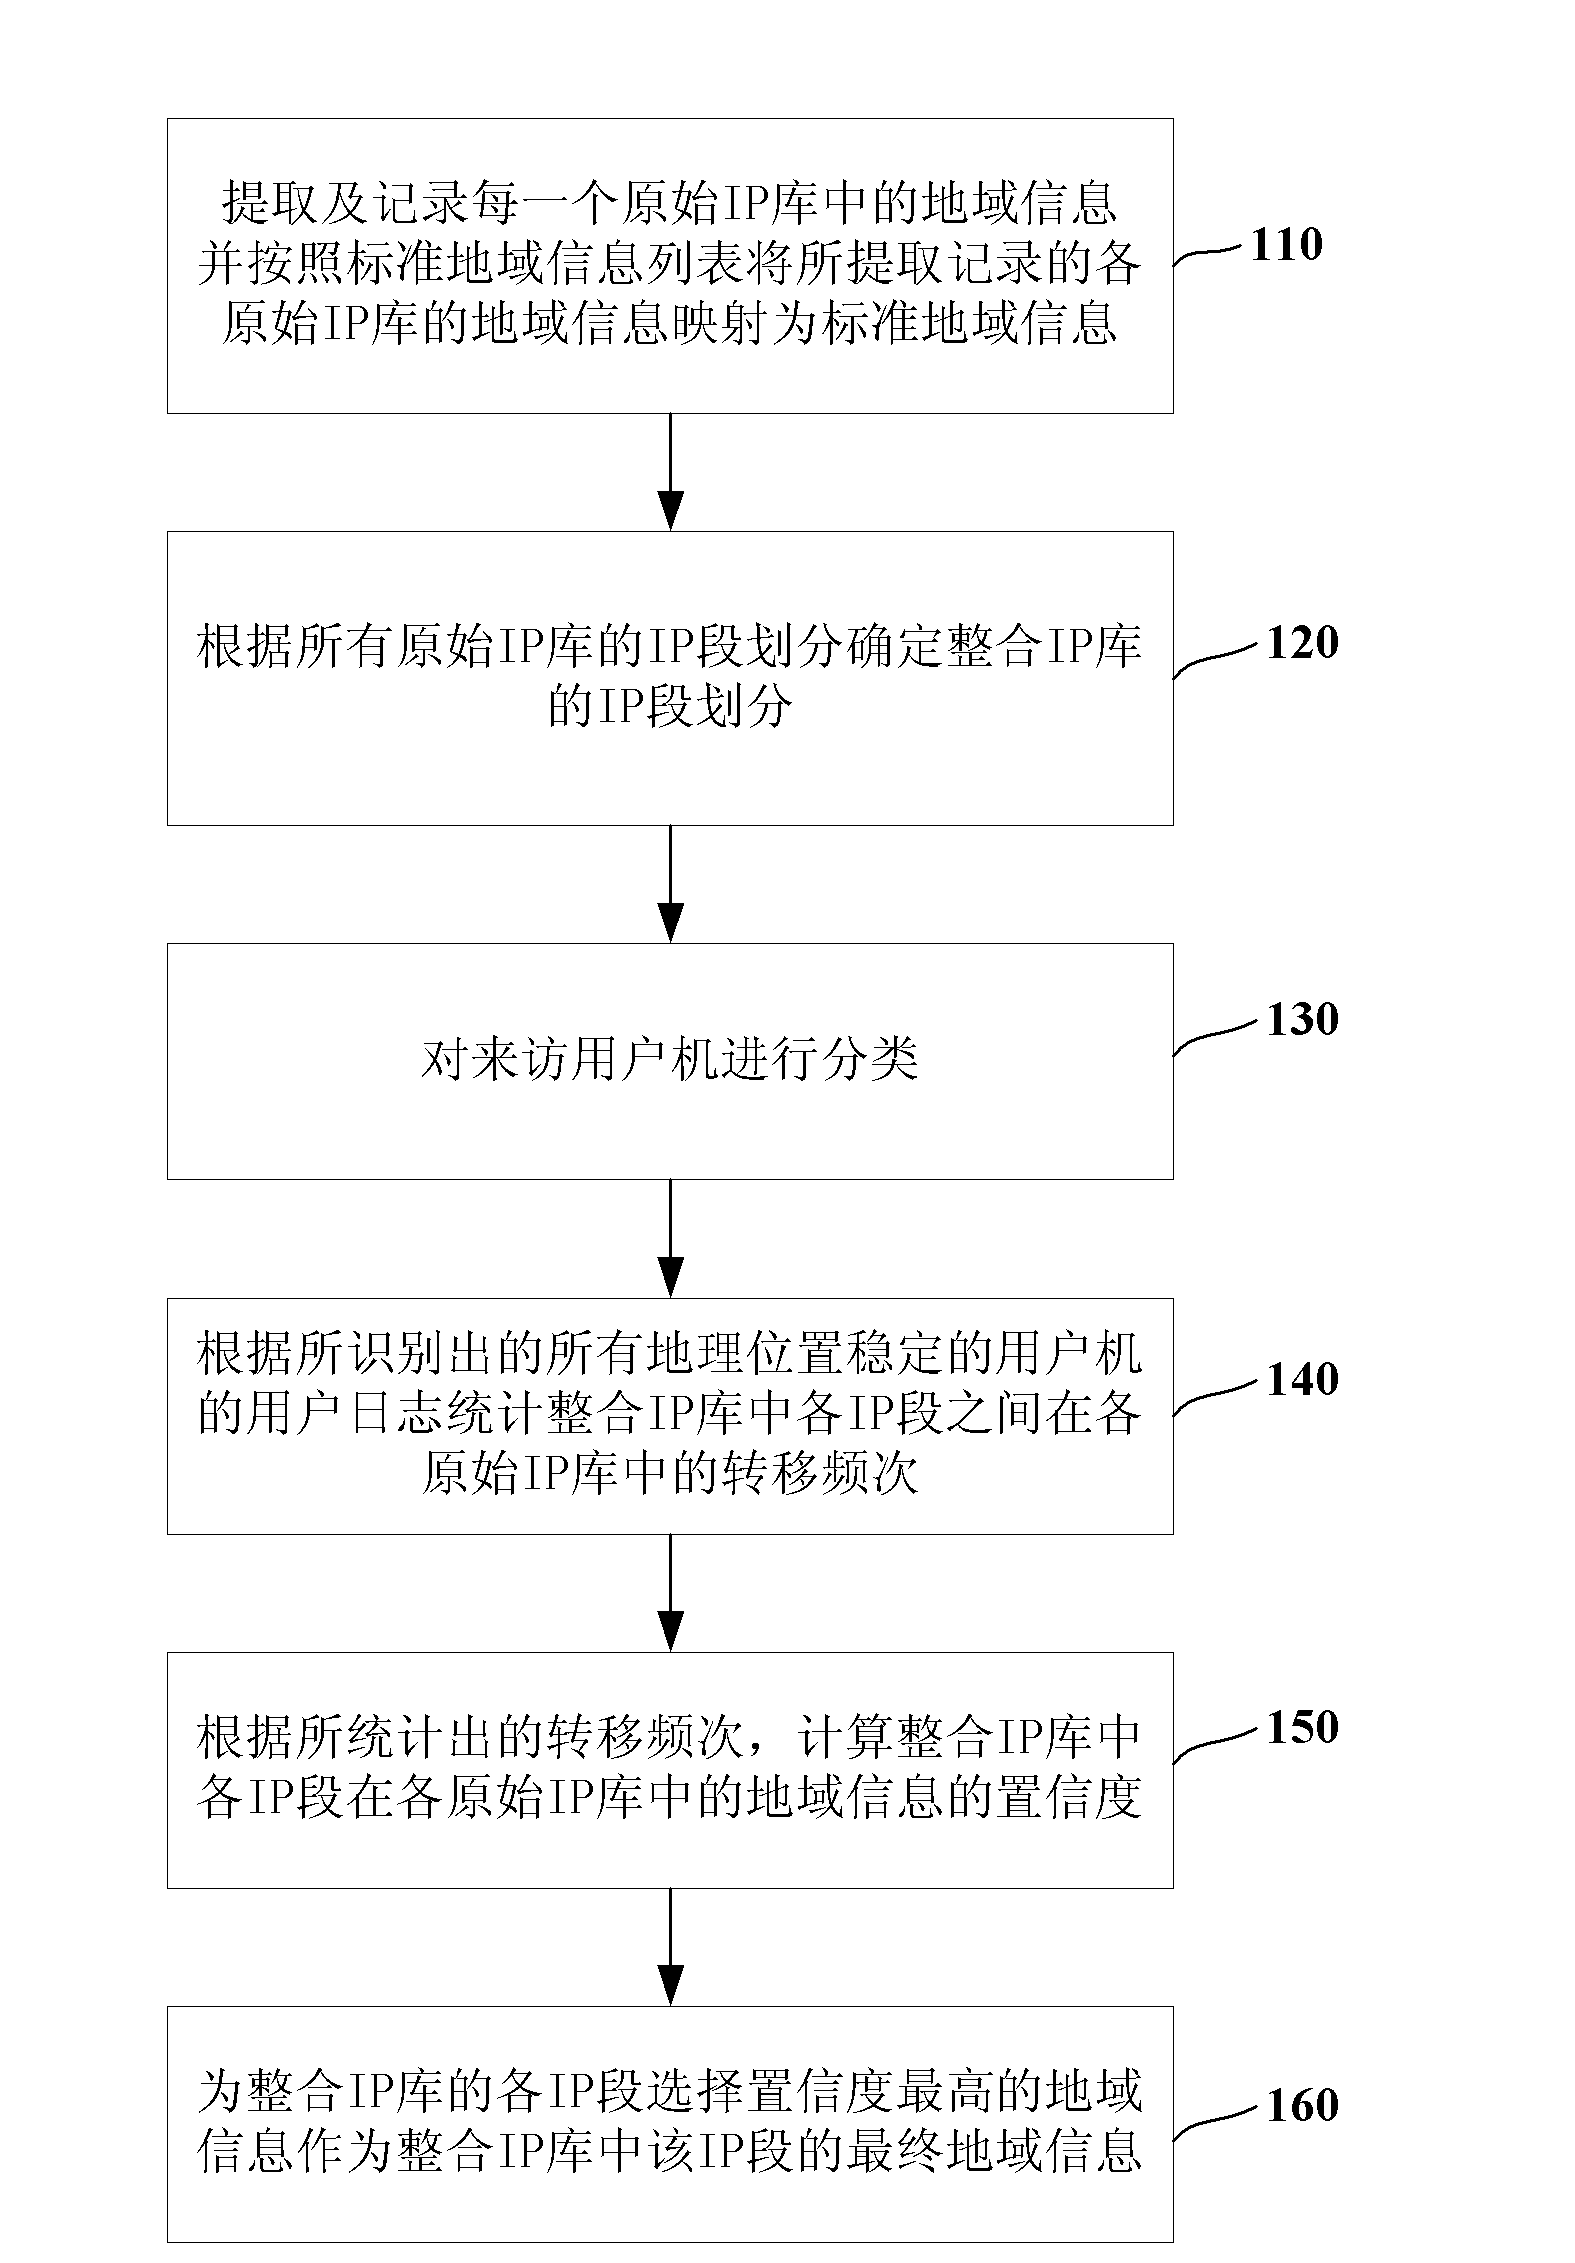 Method and system of combining multiple internet protocol (IP) regional information bases